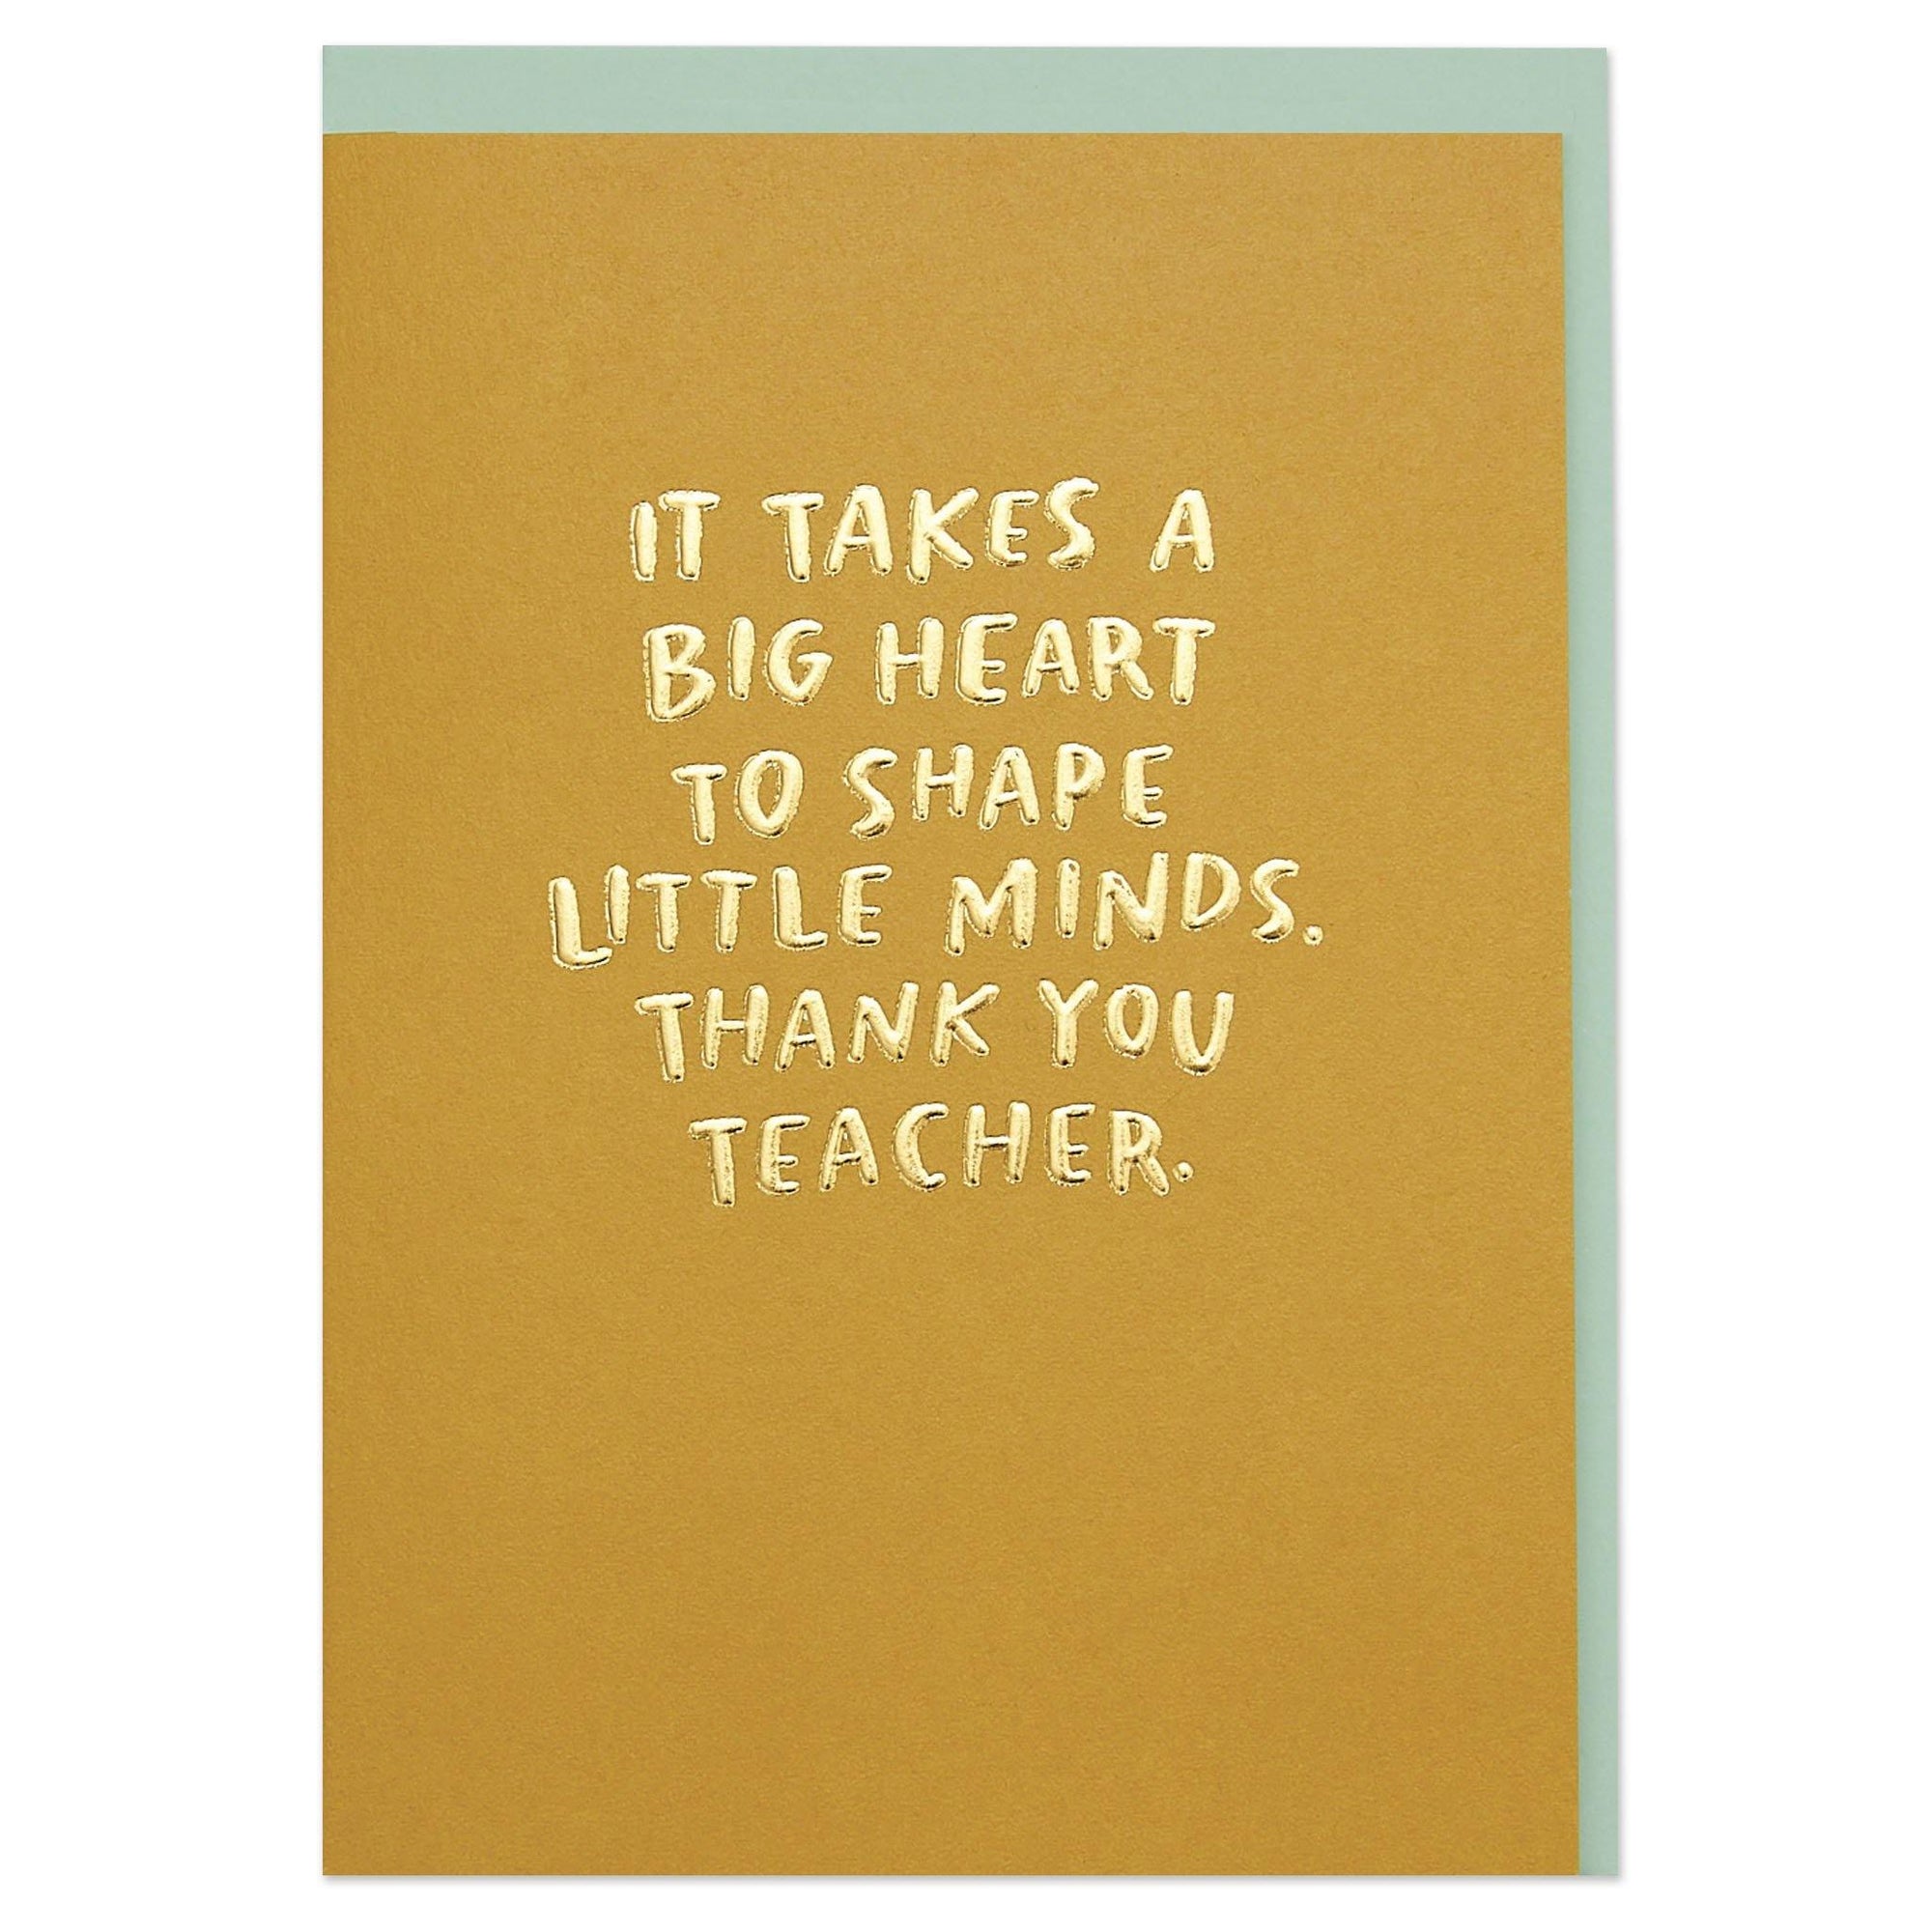 It Takes A Big Heart To Shape Little Minds Thank You Teacher Card - Penny Black